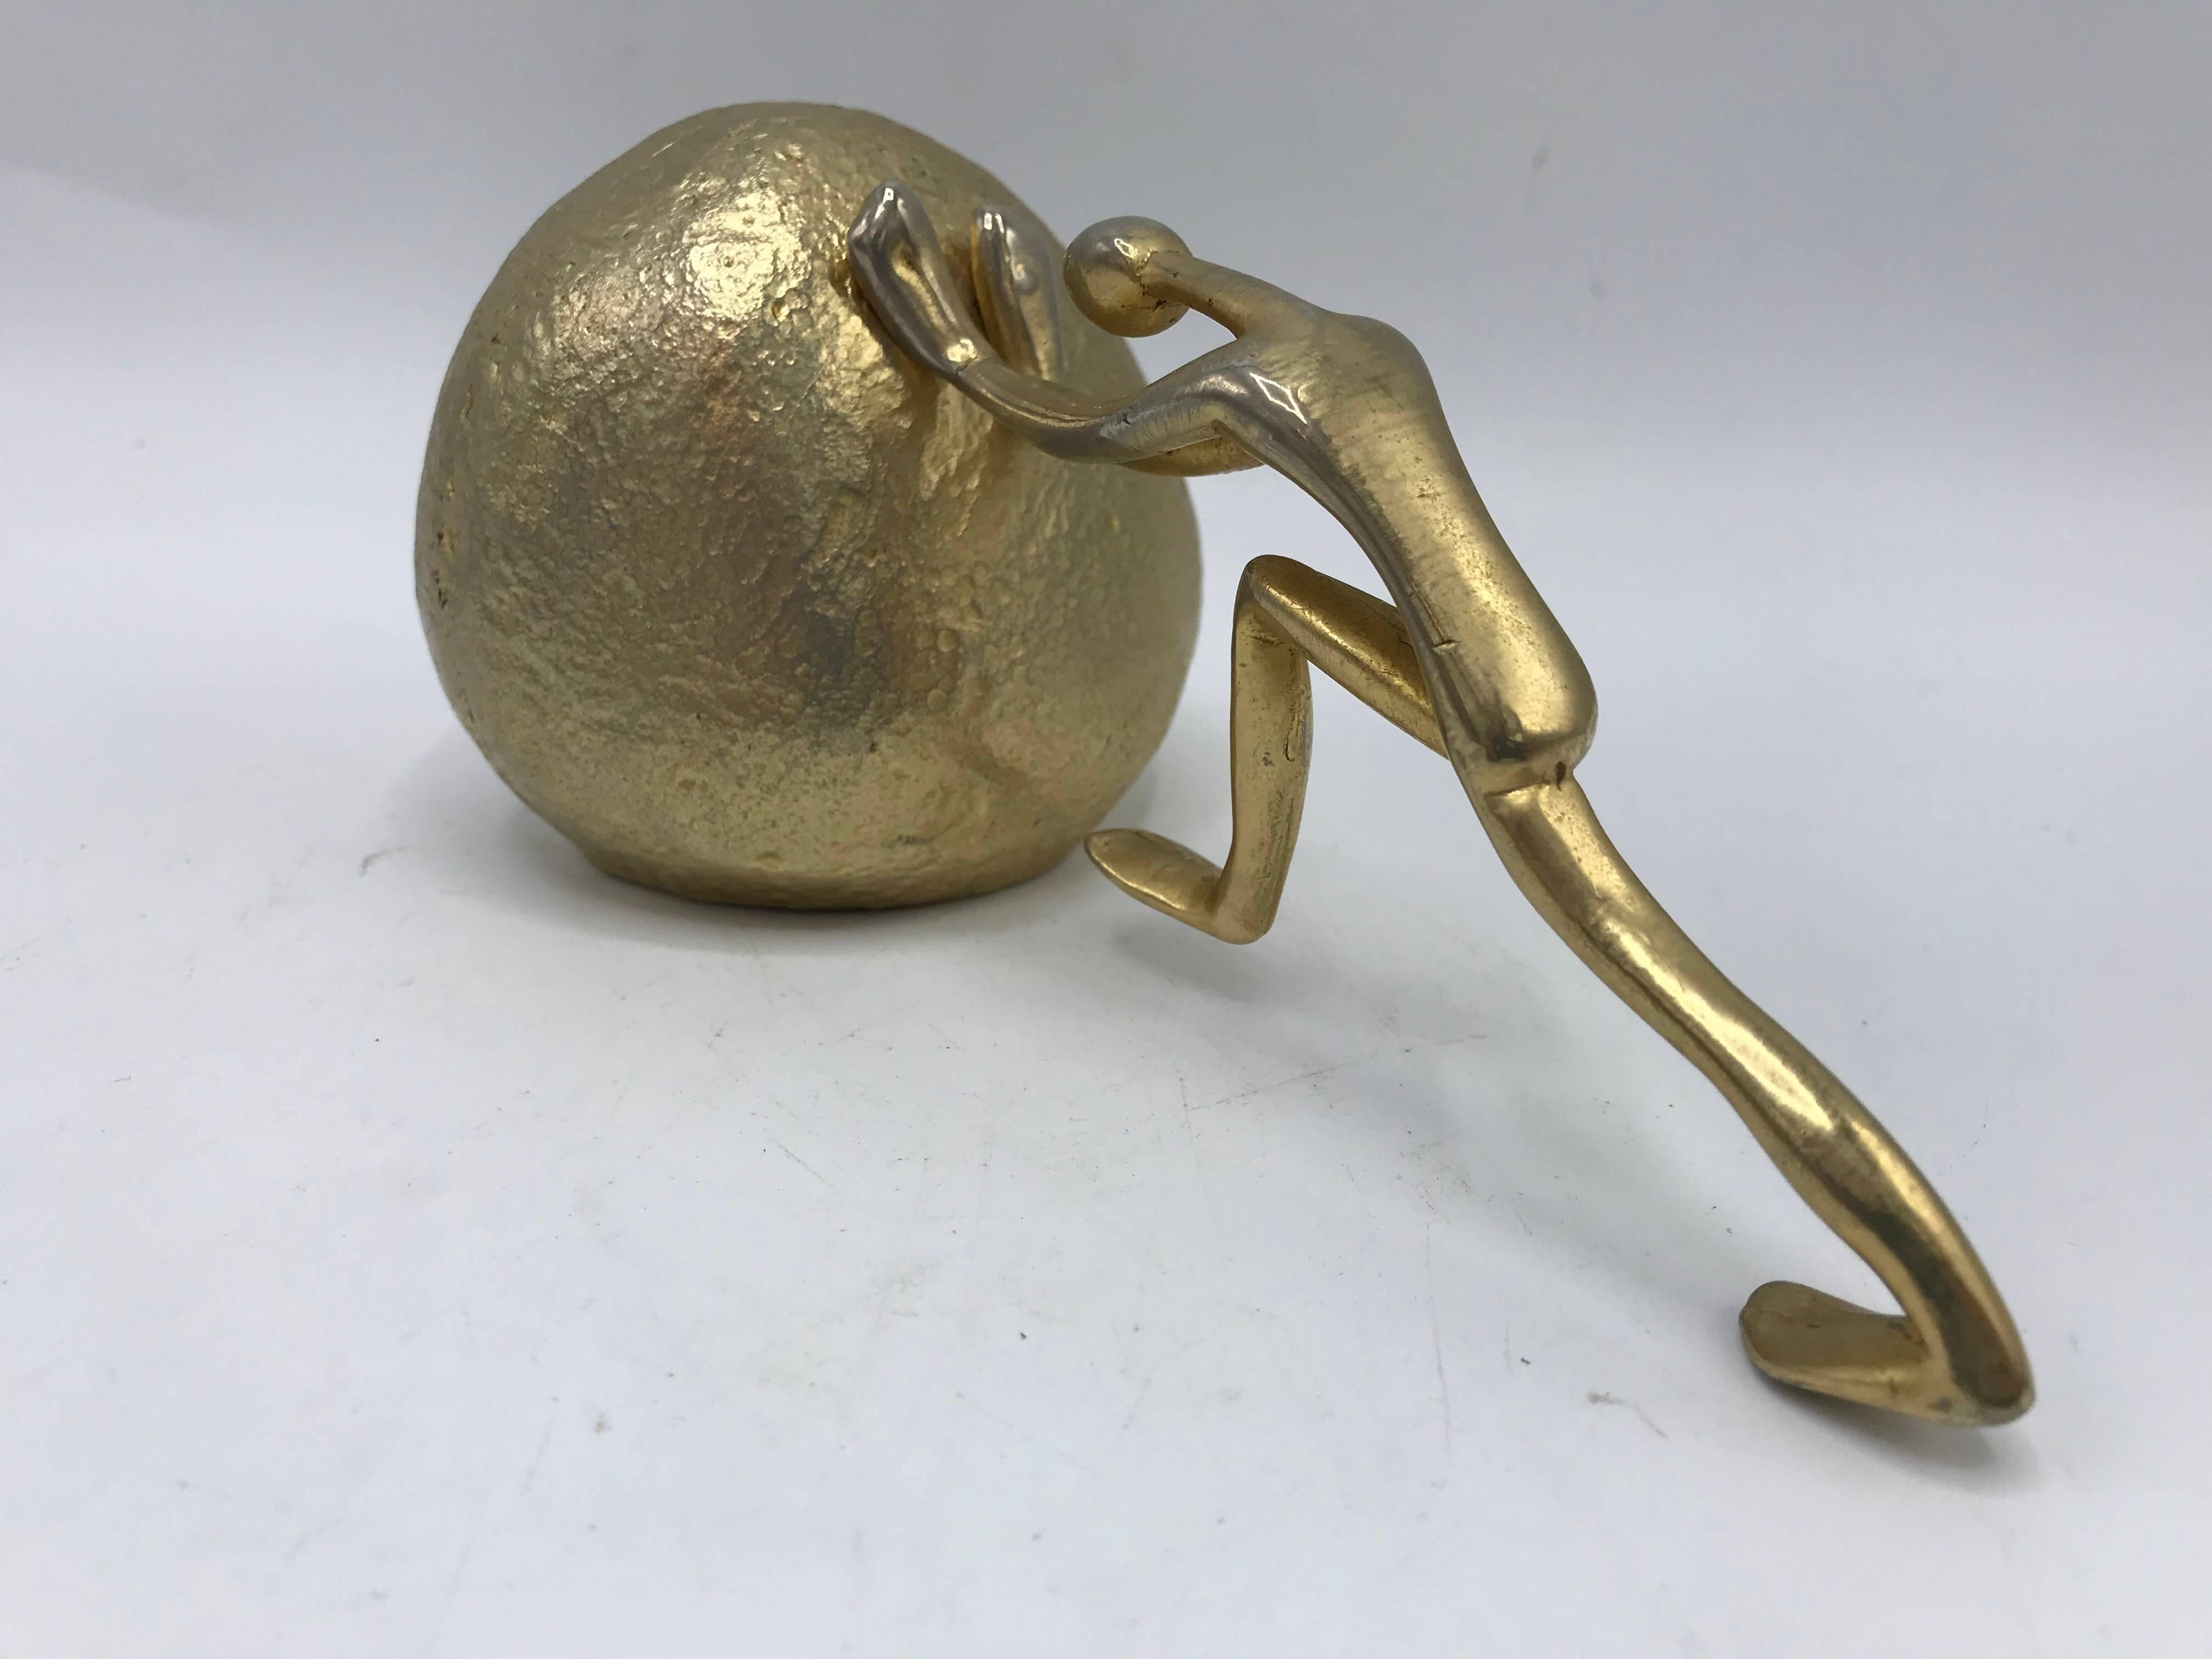 Offered is a stunning, 1970s Ted Arnold gold 